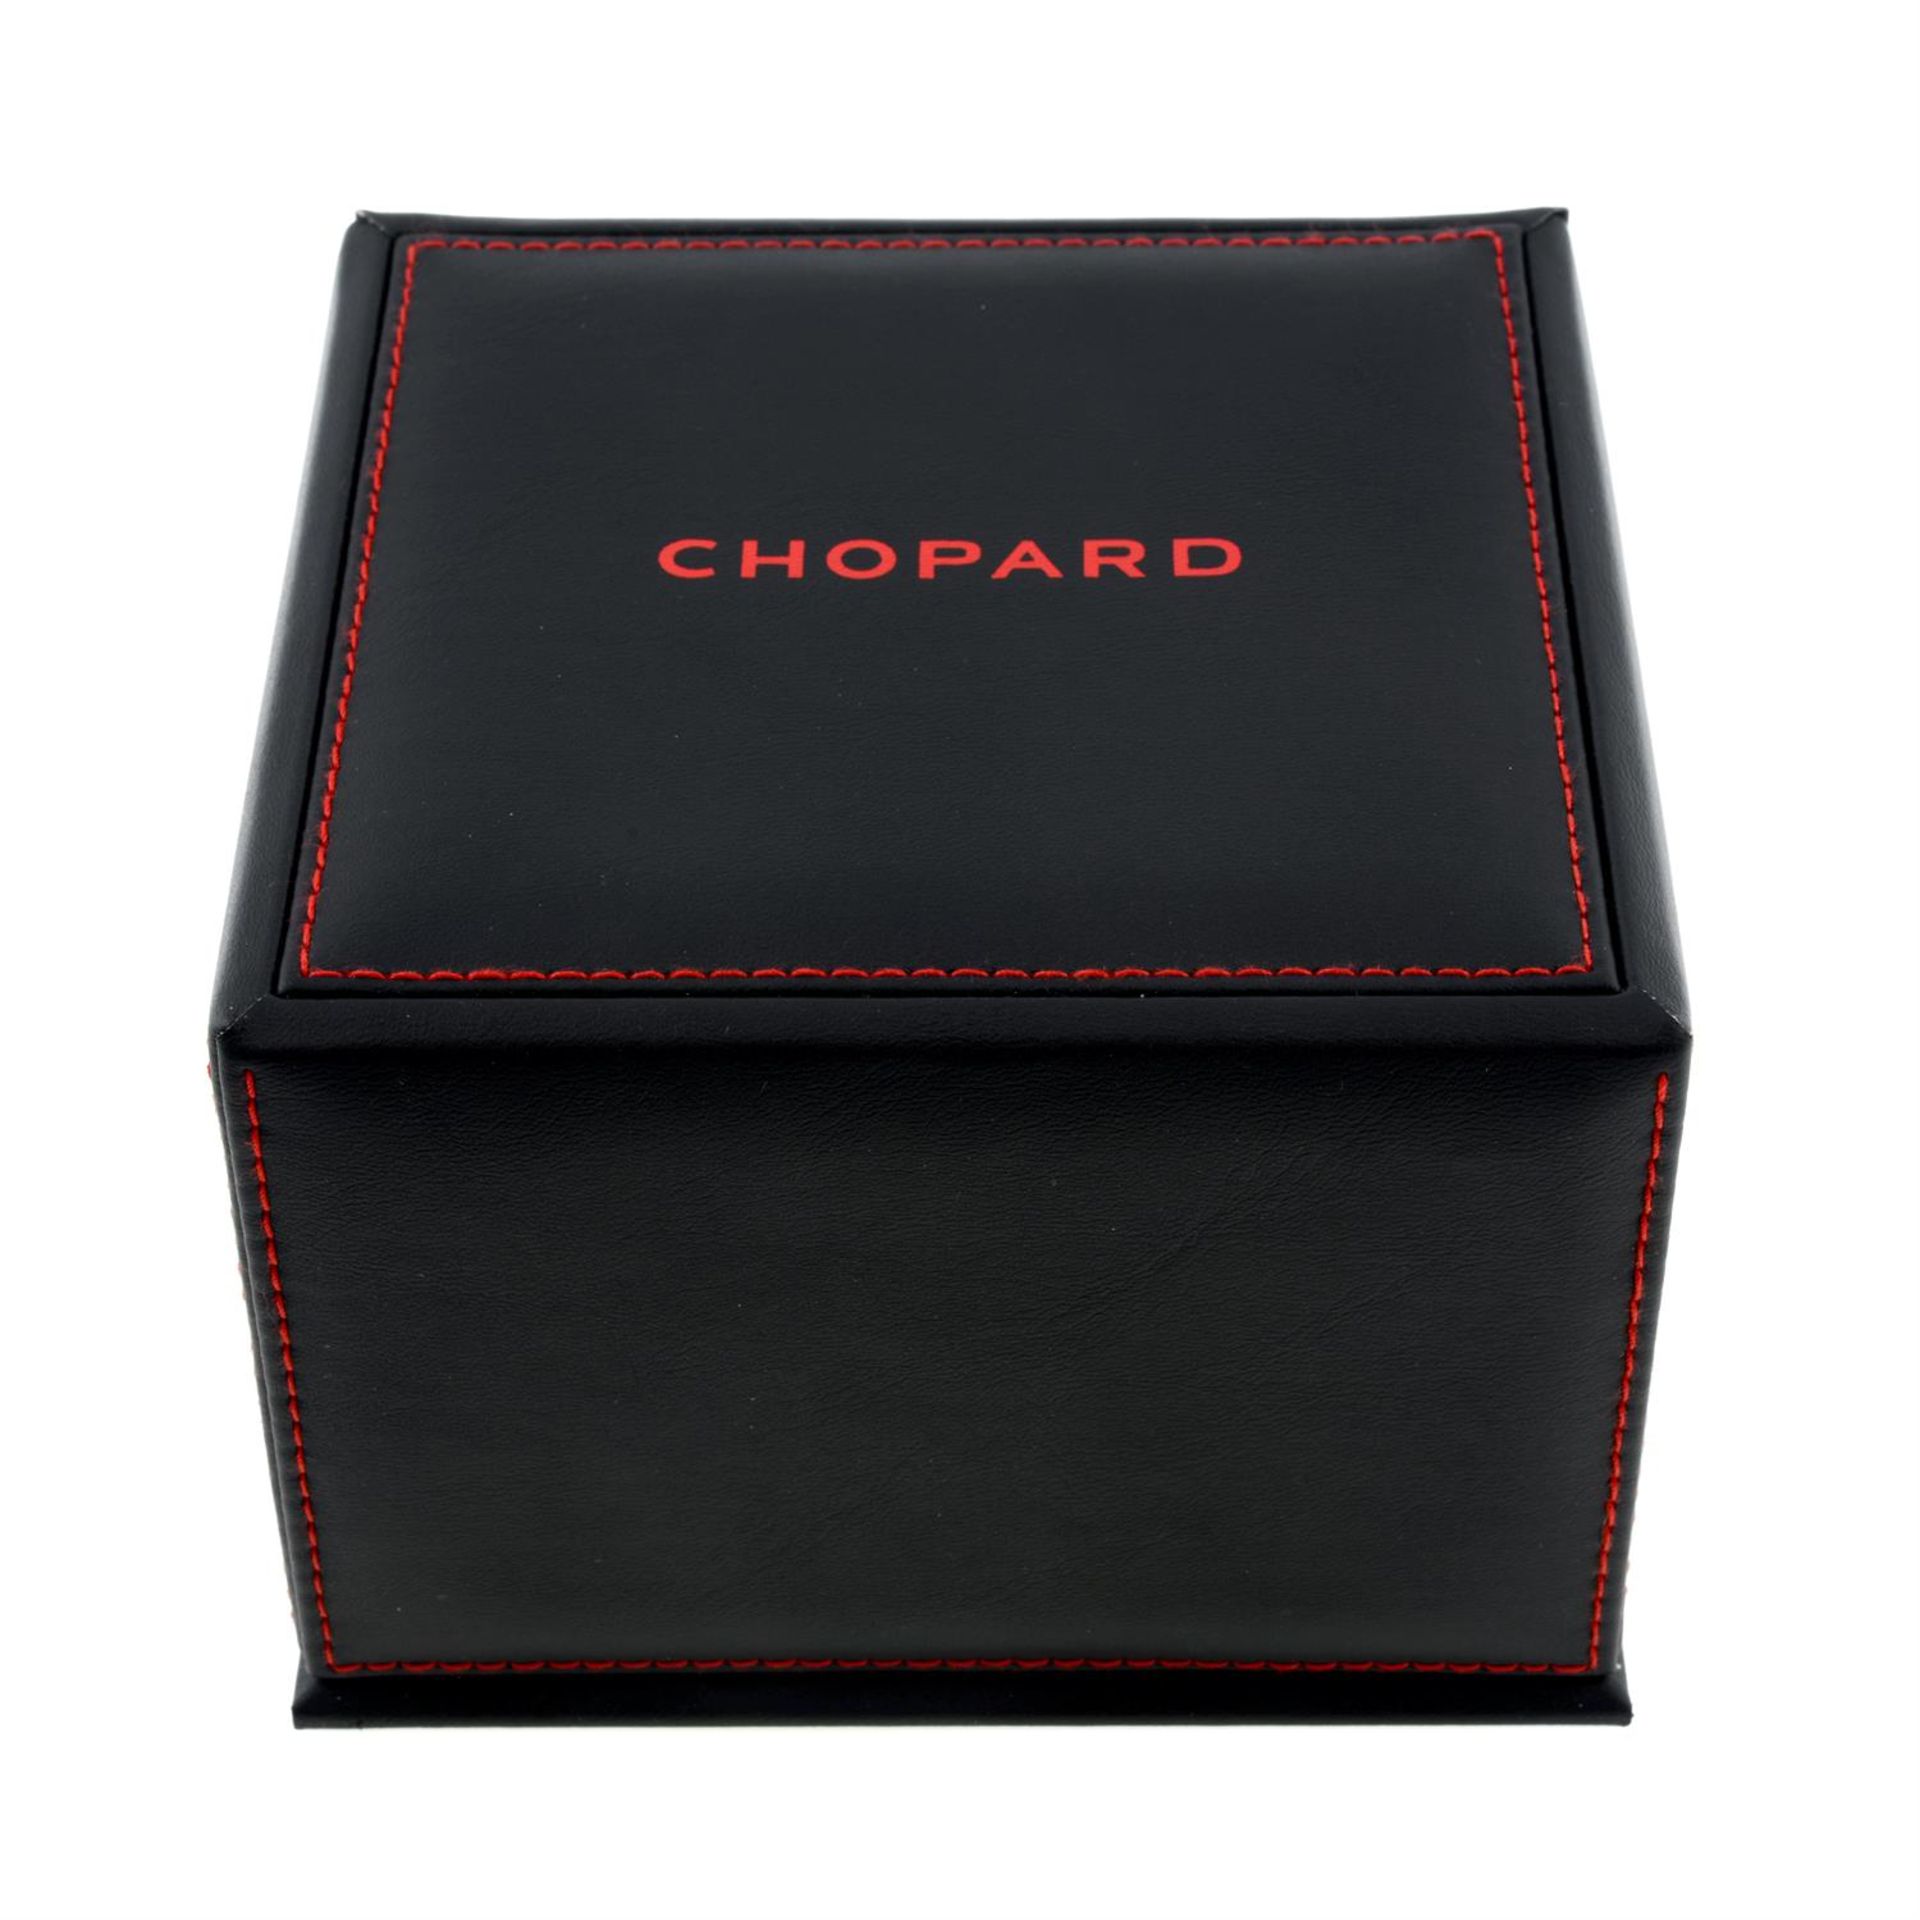 CHOPARD - a stainless steel Mille Miglia Competitor Edition 2019 chronograph wrist watch, 44mm. - Image 6 of 6